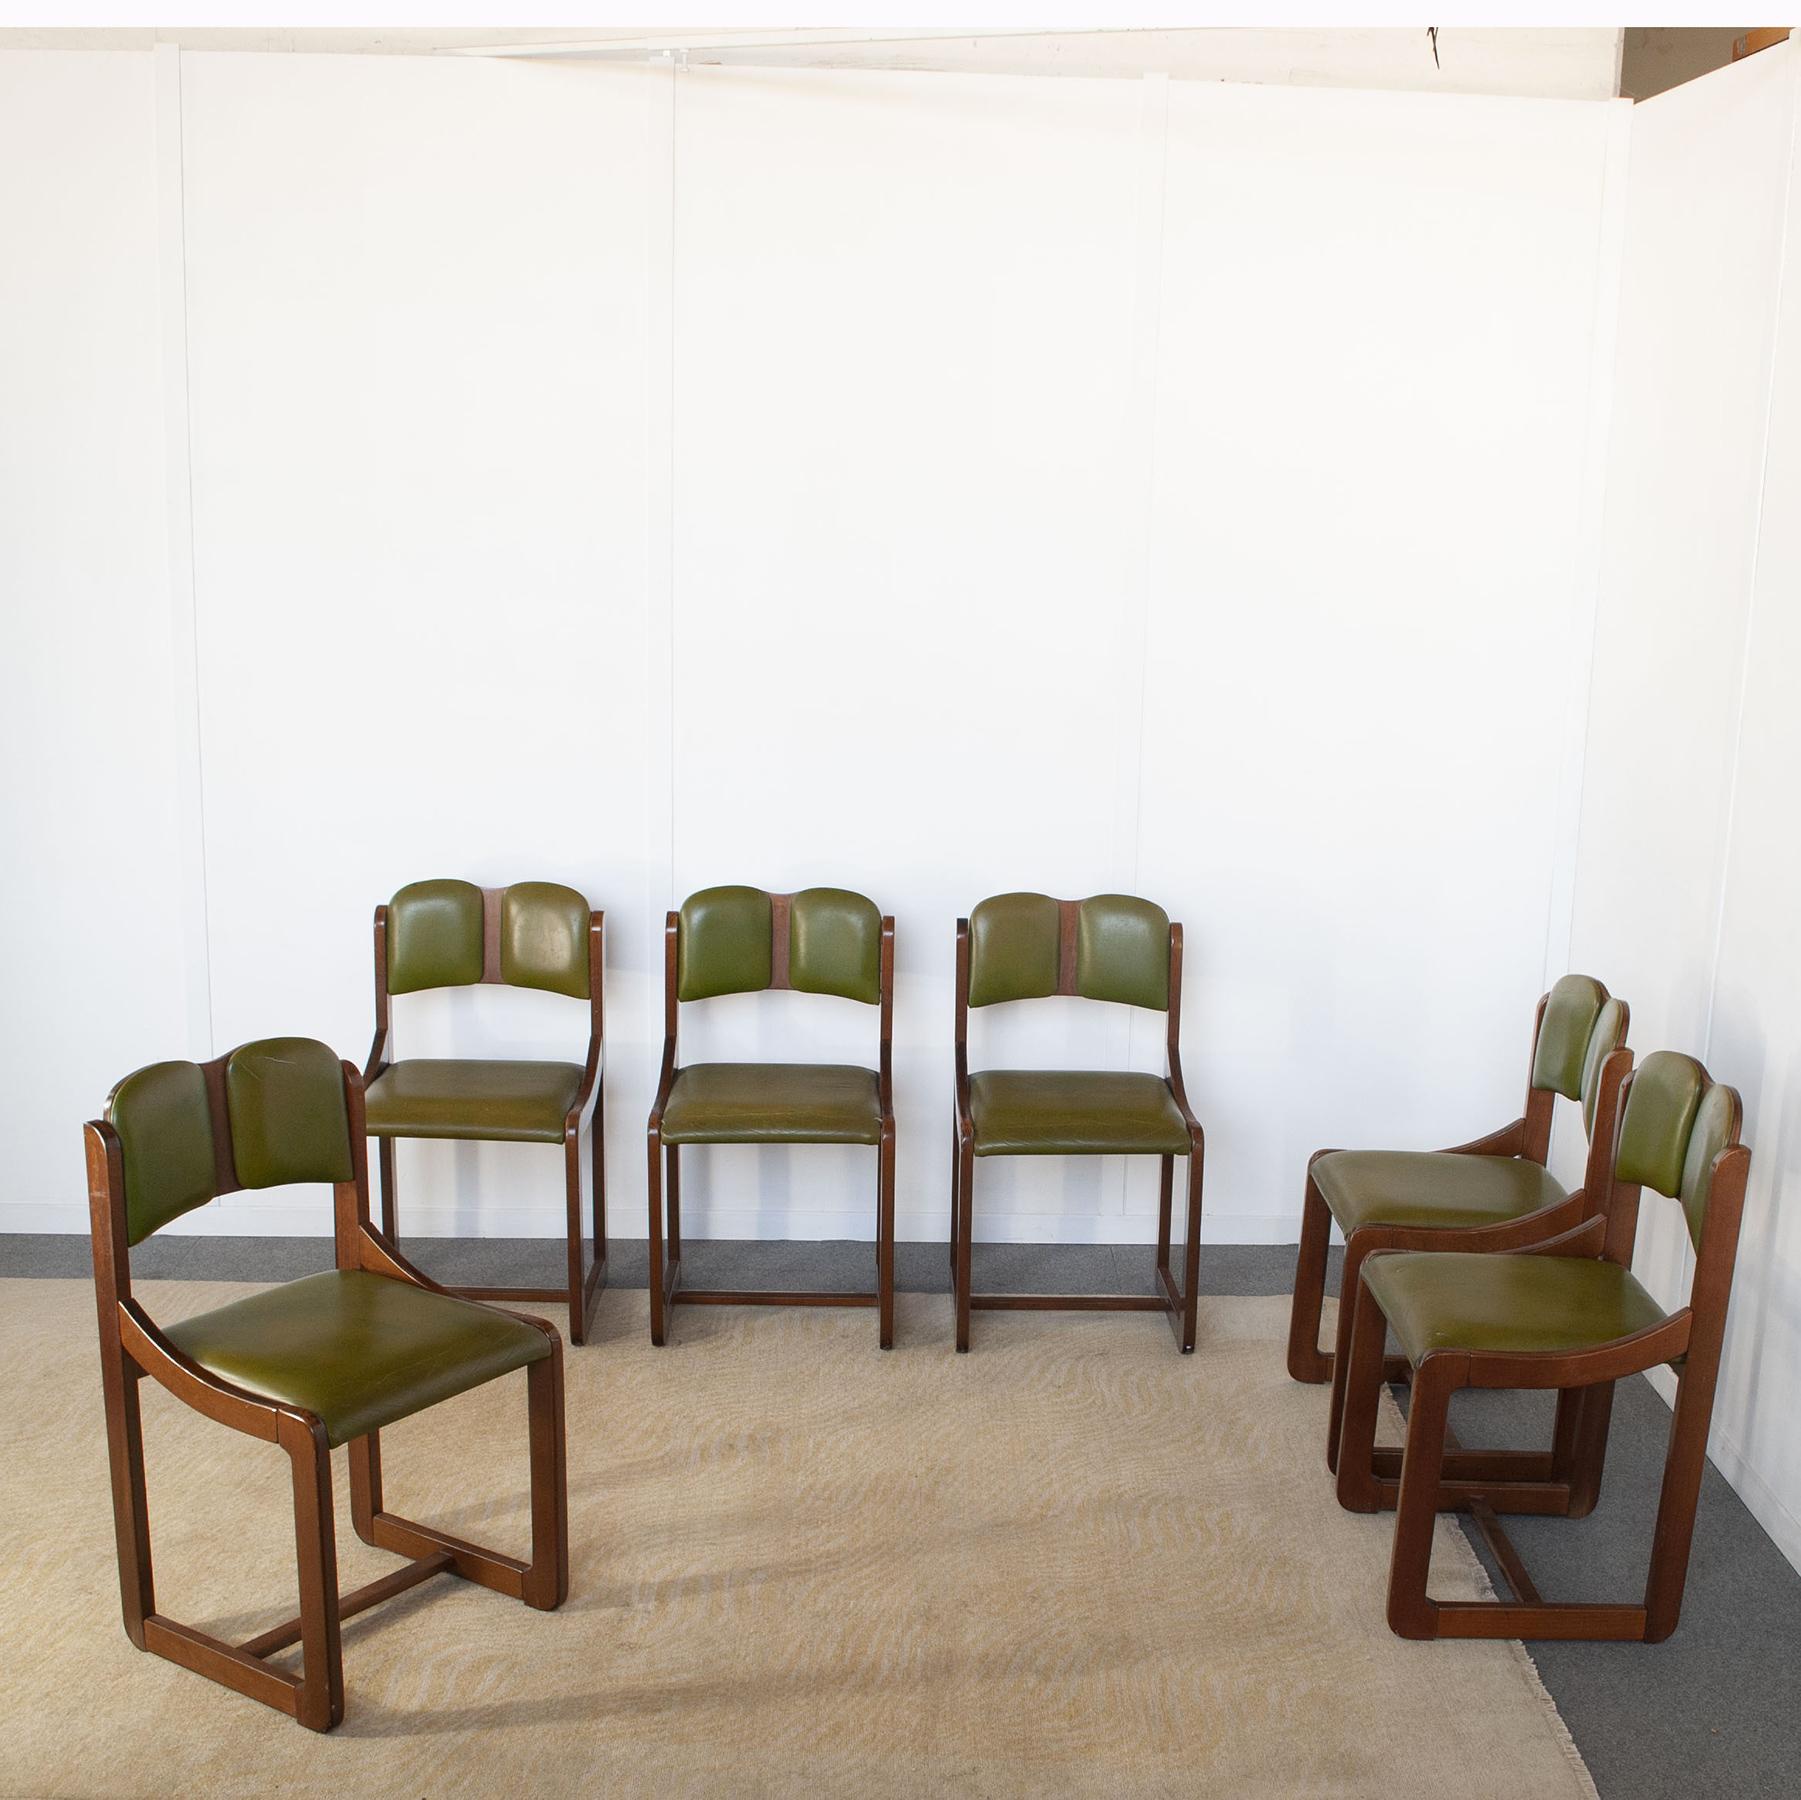 Set of six wooden chairs with green leather seat of the period Italian production 1960s.